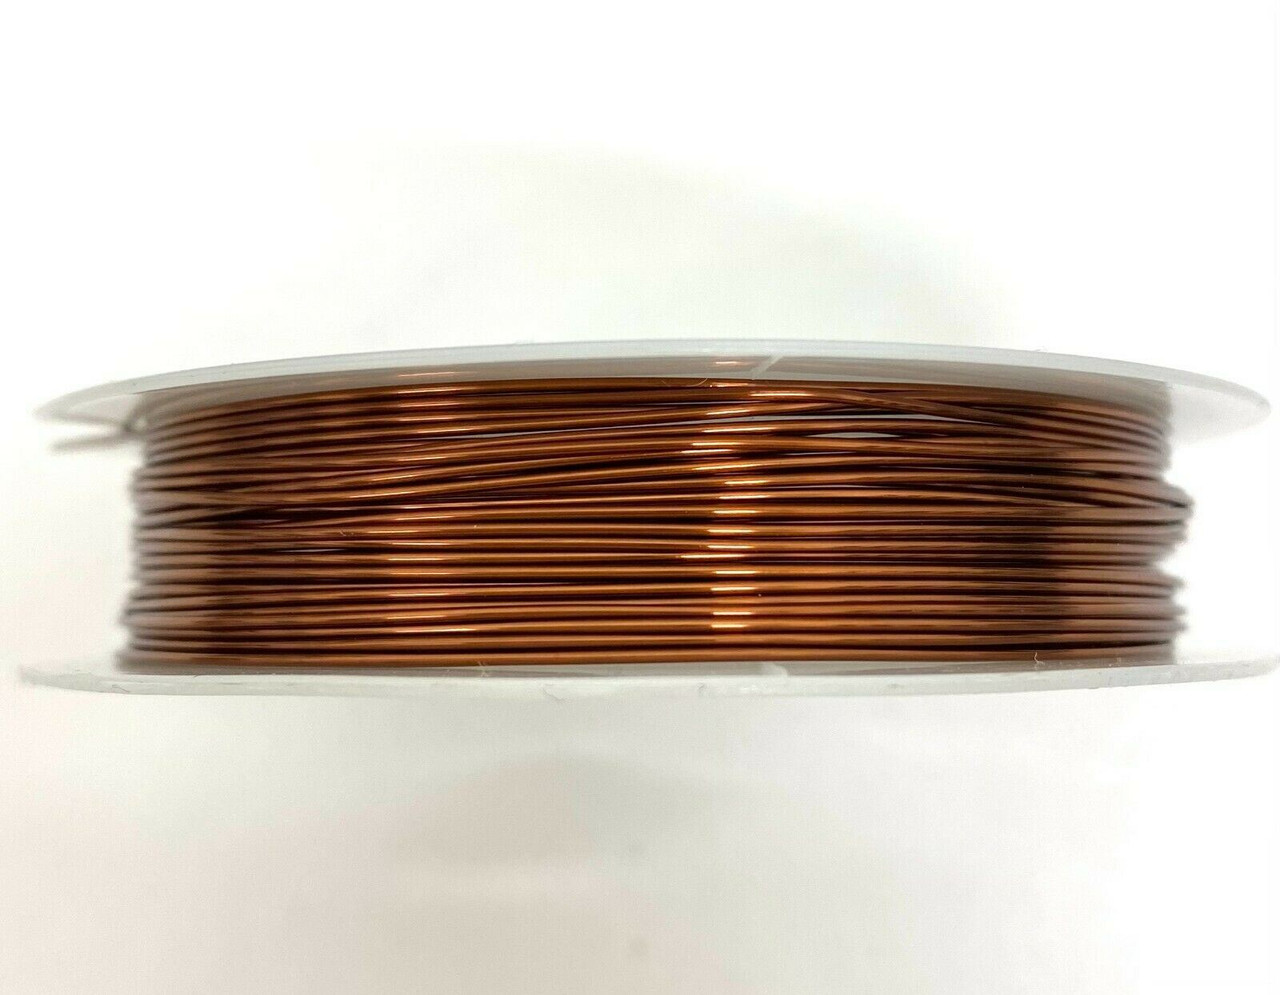 Roll of Copper Wire, 0.8mm thickness, BROWN colour, approx 4m length